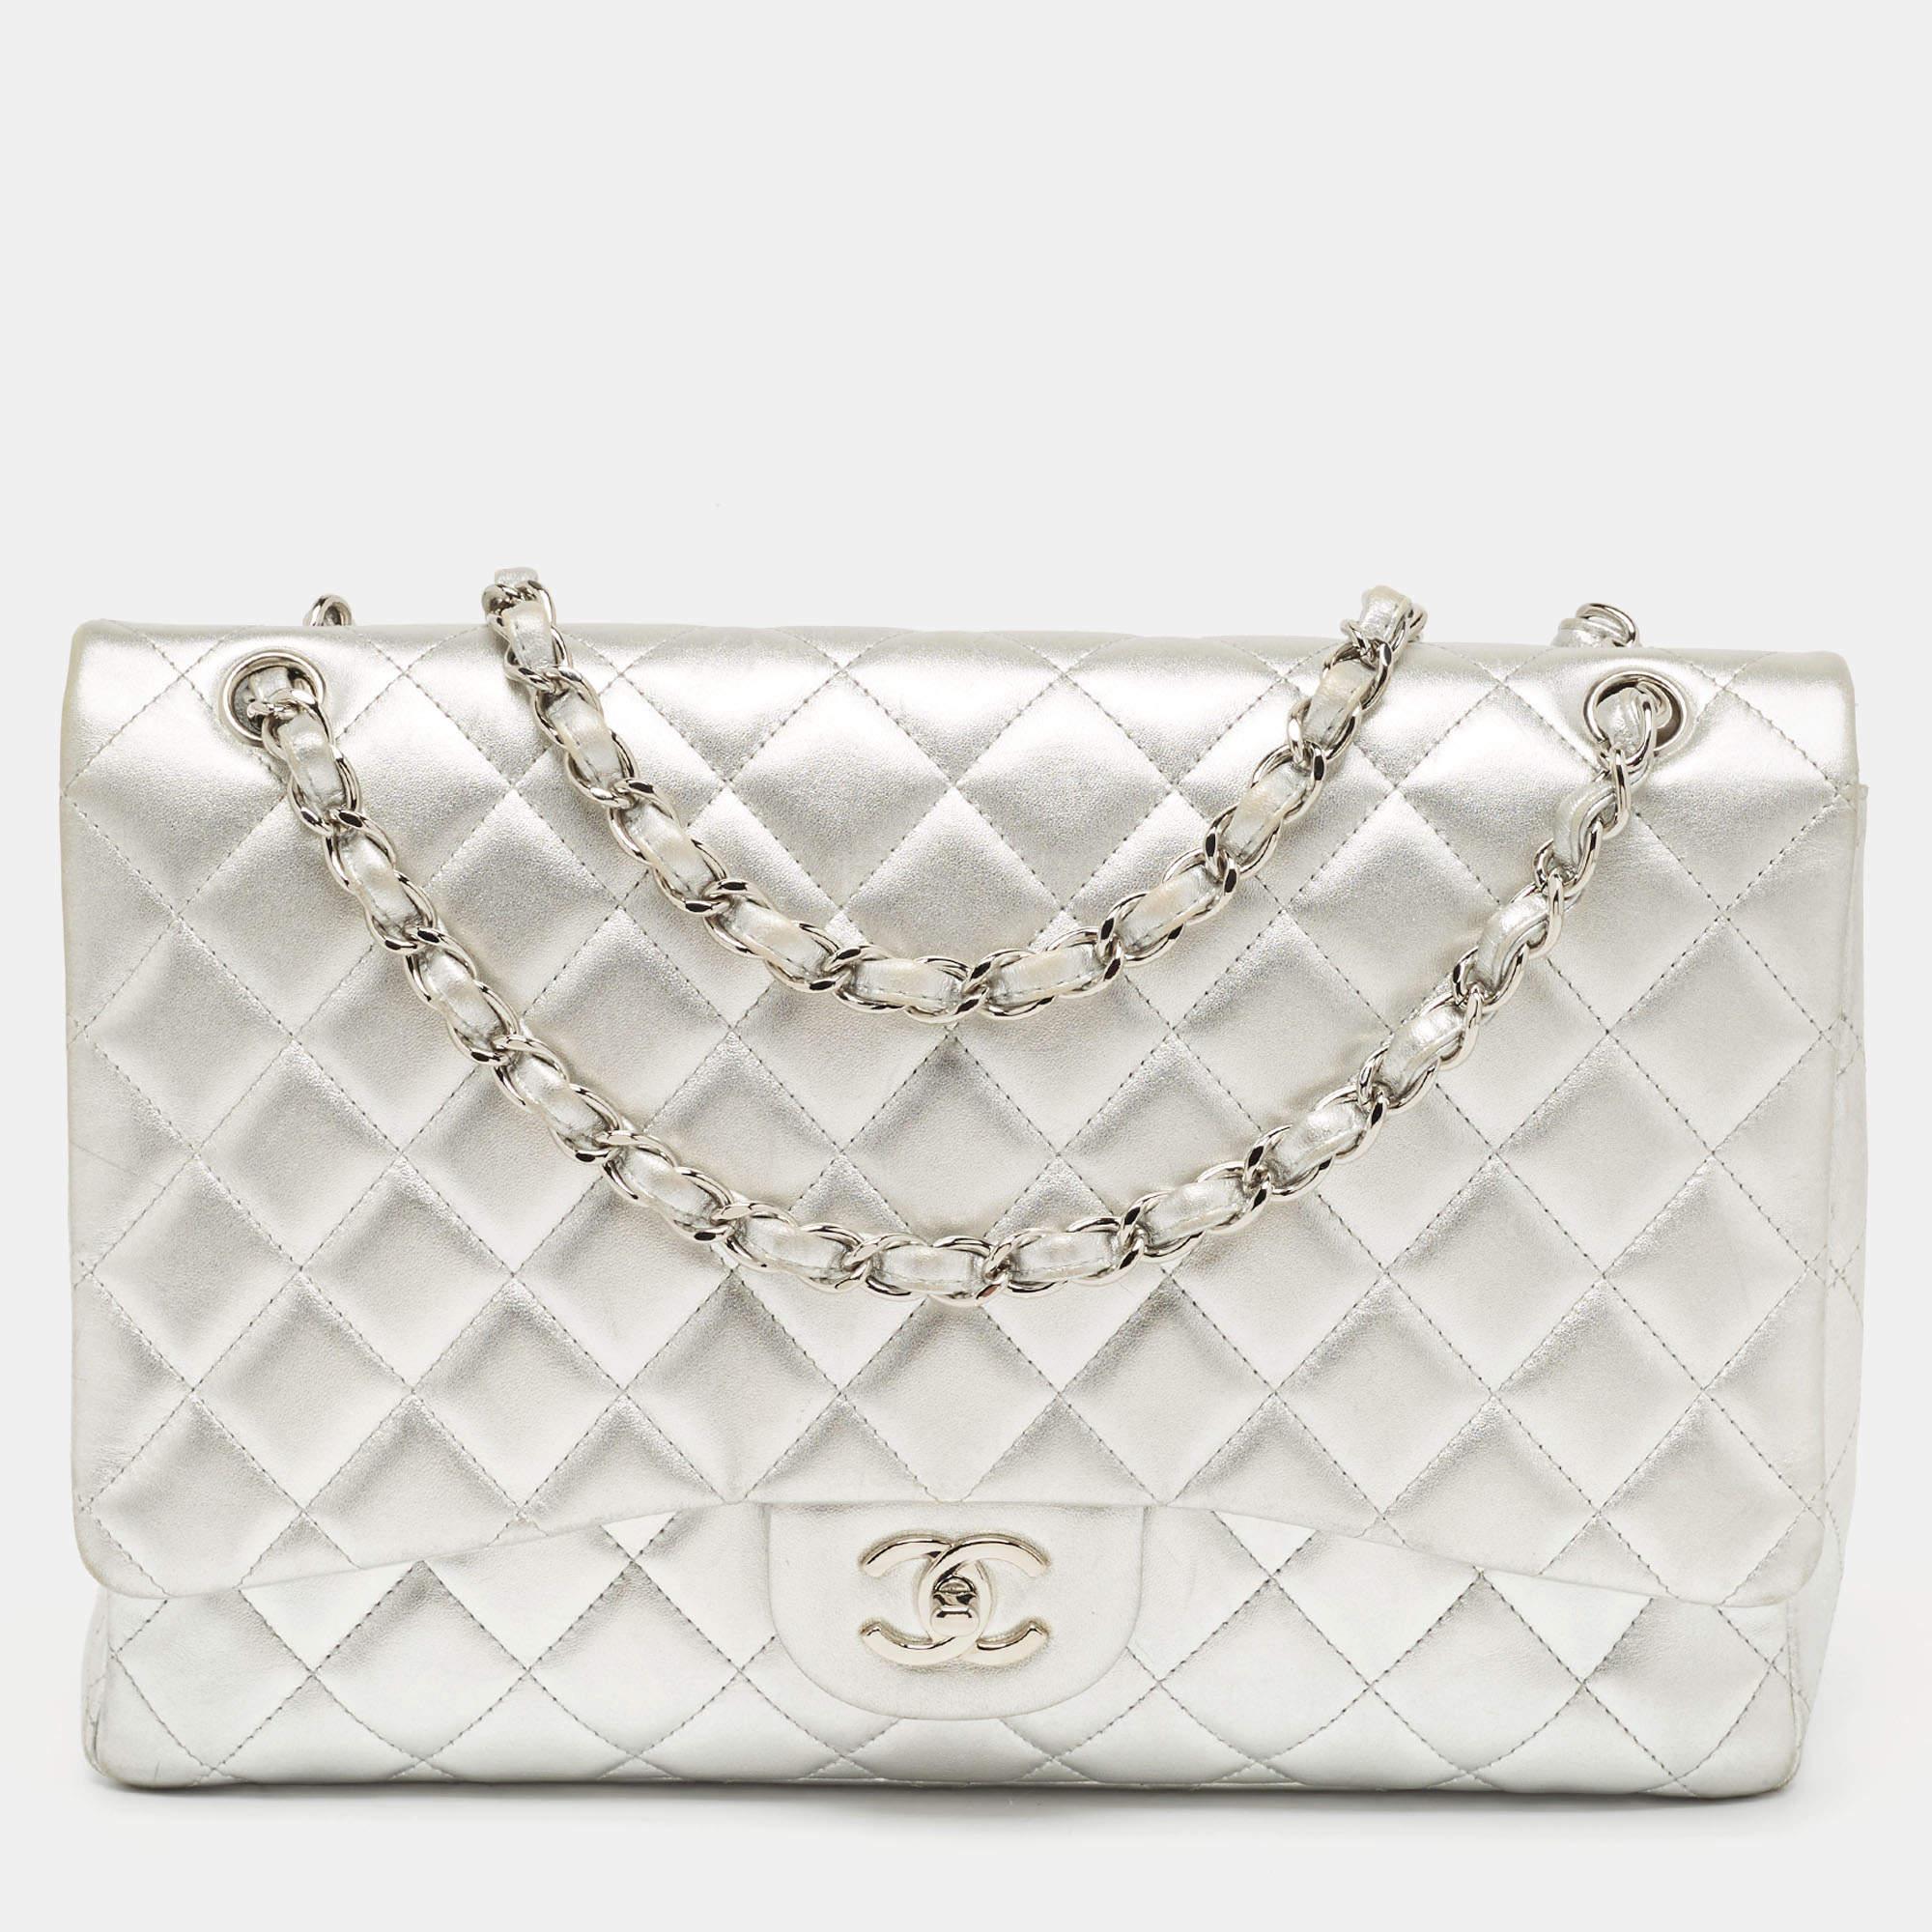 Chanel Silver Quilted Lambskin Leather Maxi Classic Single Flap Bag For Sale 10